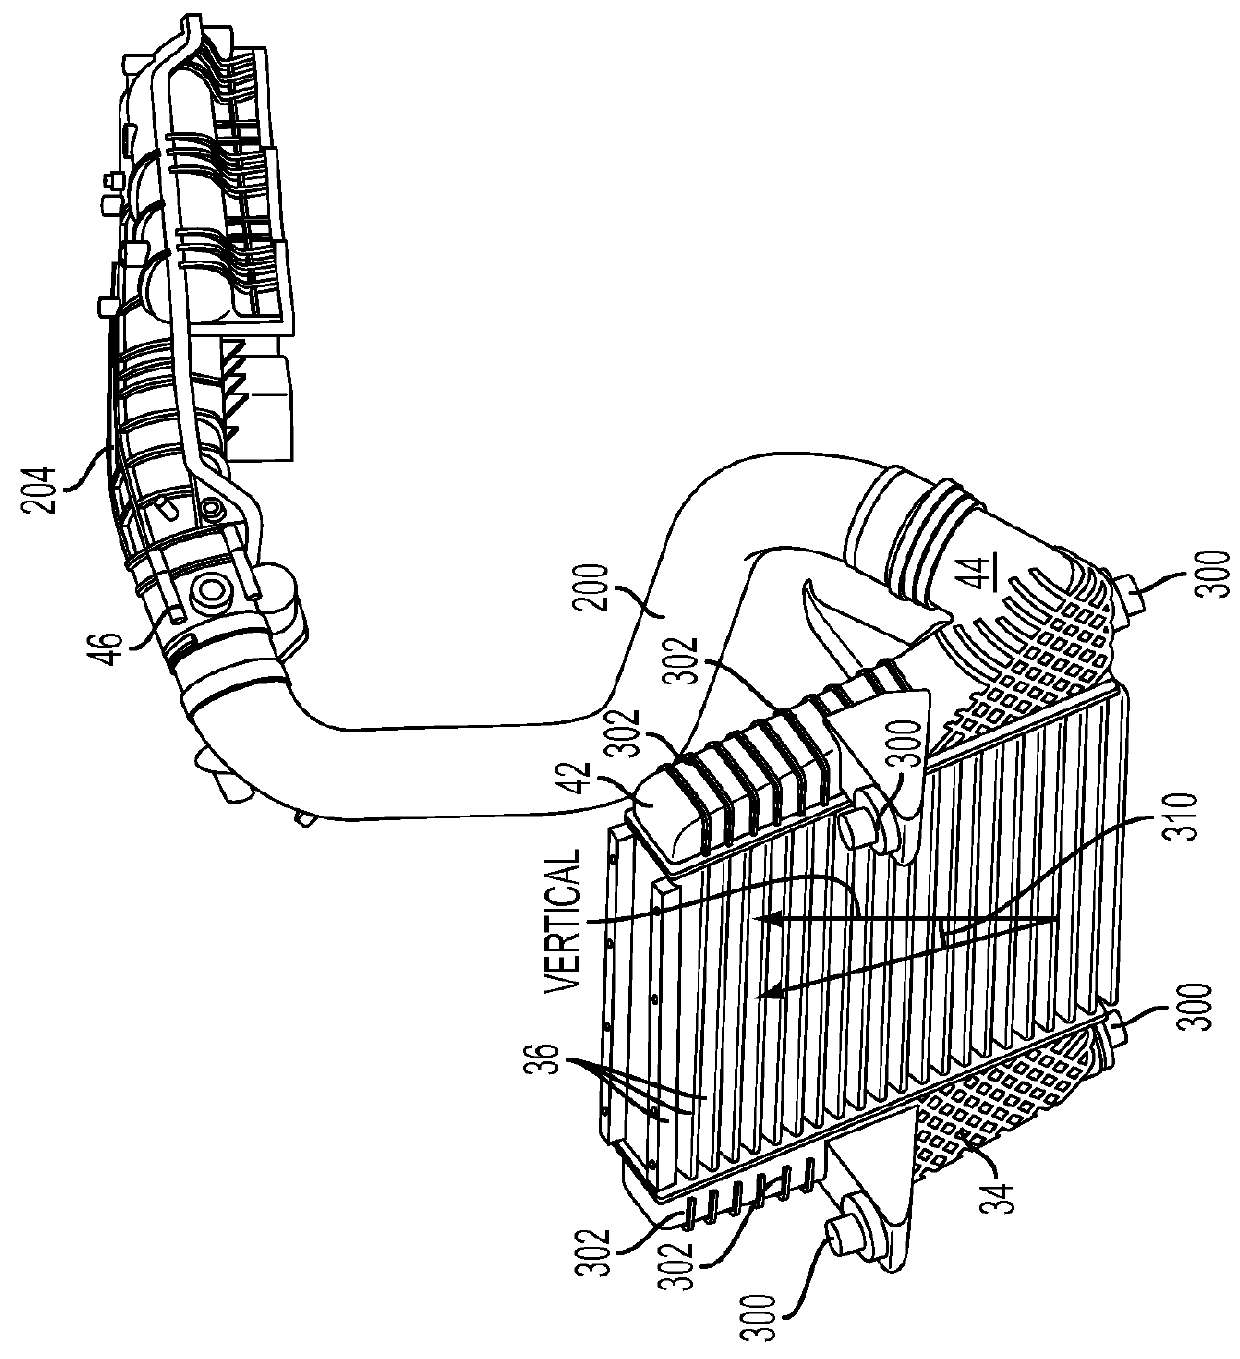 Air cooler having a condensation trap and method for air cooler operation